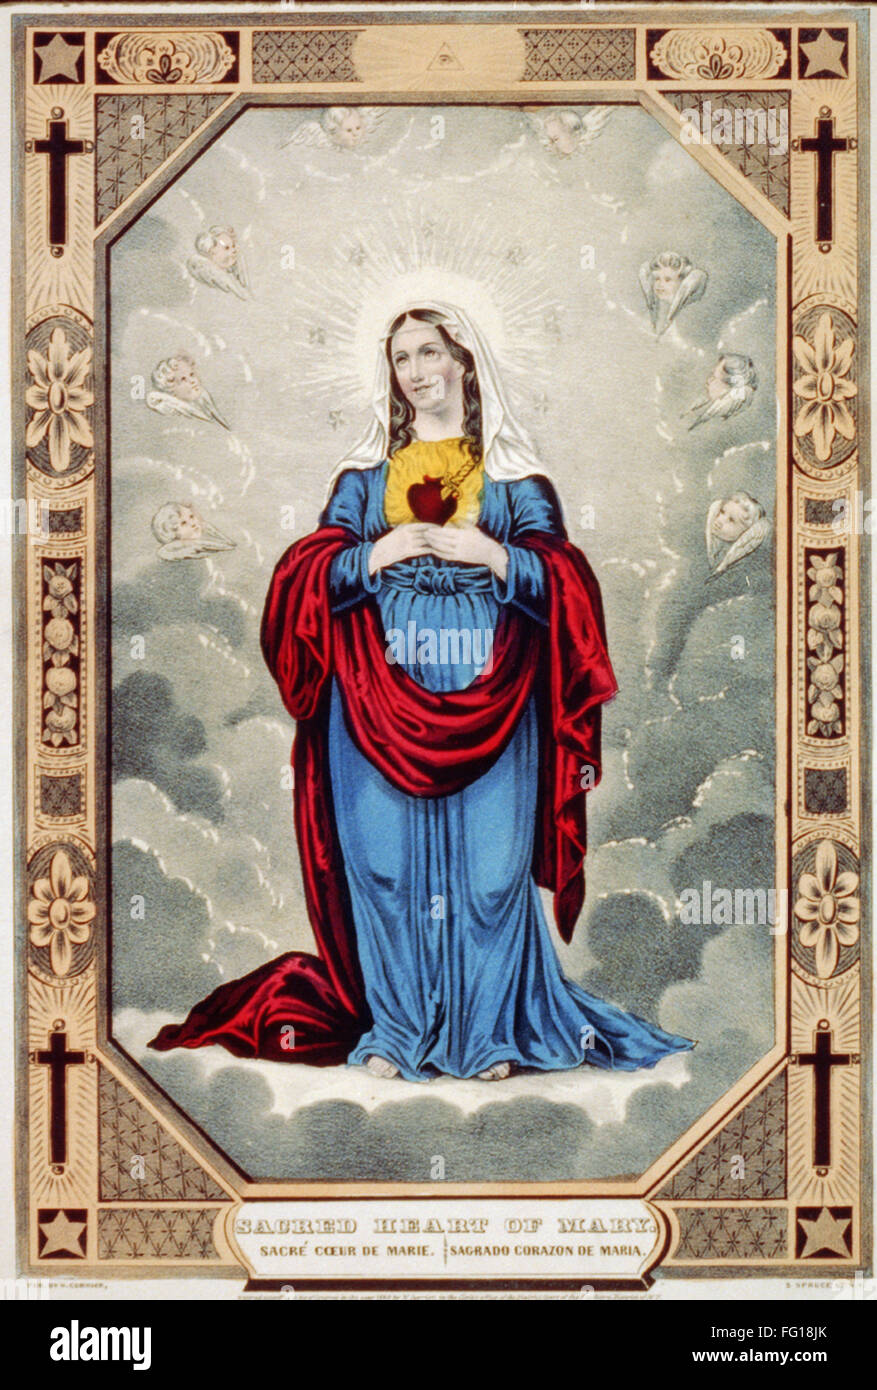 IMMACULATE HEART OF MARY. /nDevotional name used to refer to the Virgin  Mary. Also called The Sacred Heart of Mary, the heart represents her love  for God and compassion for people. Lithograph